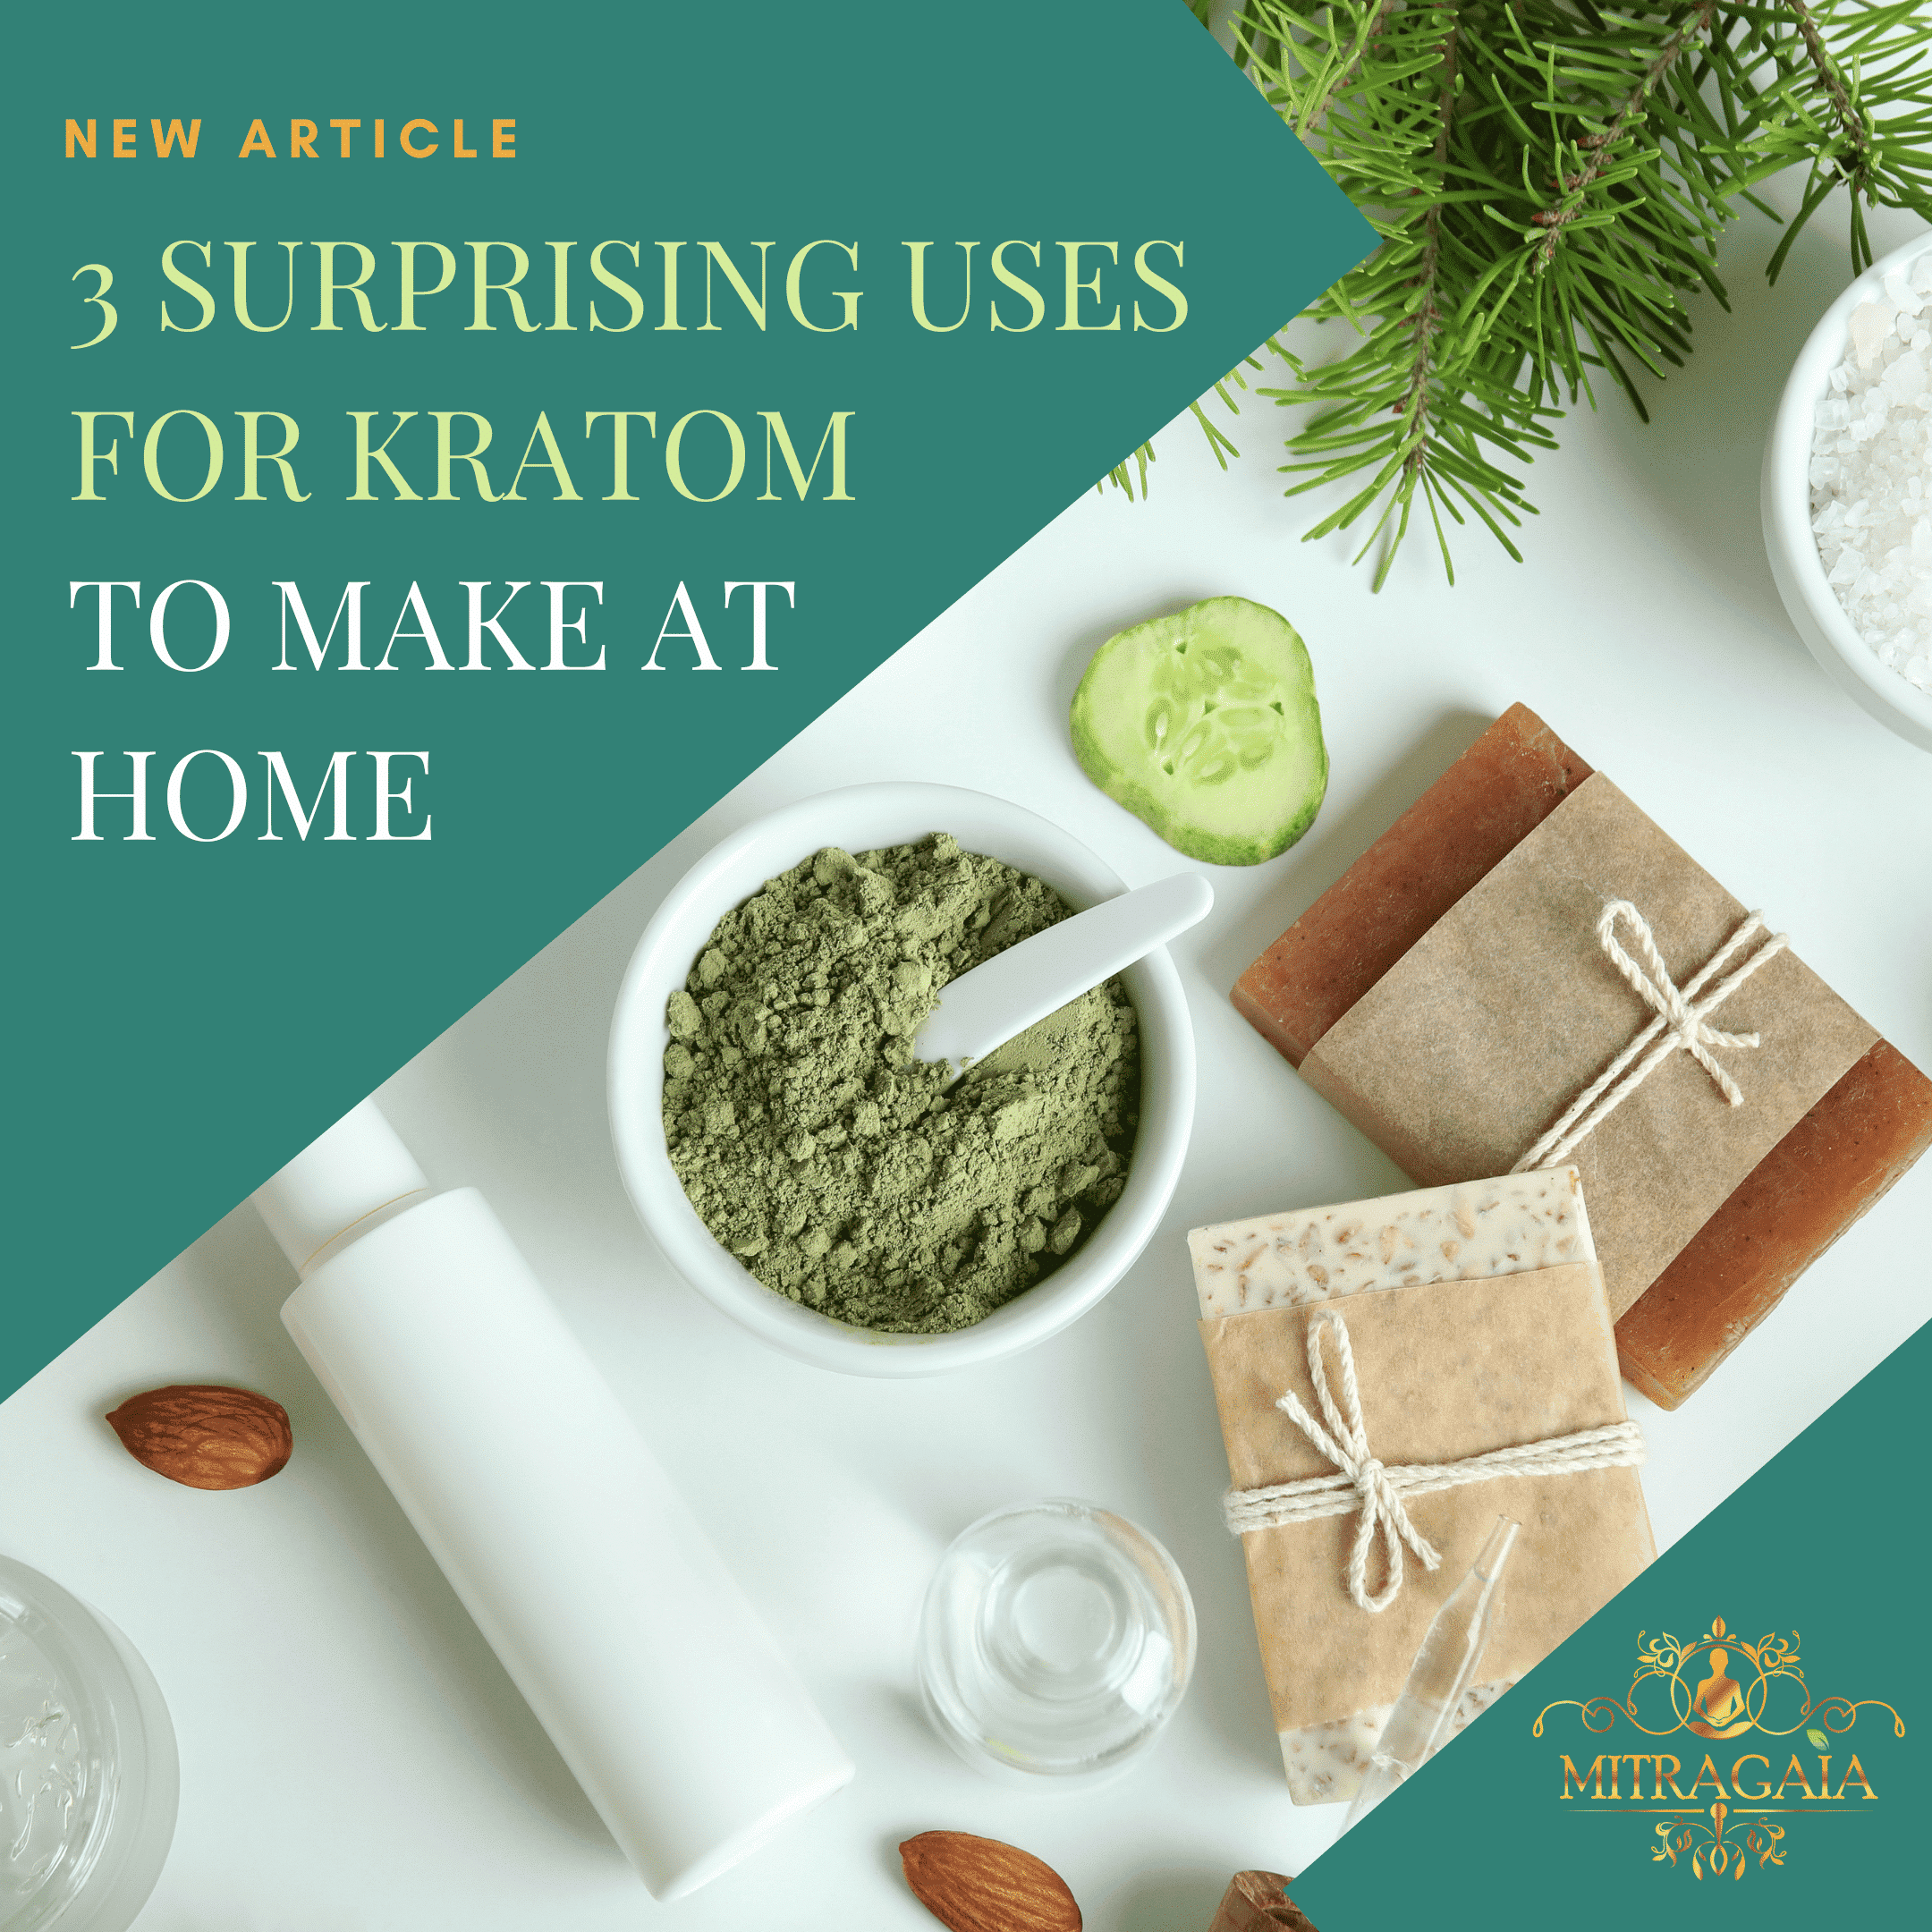 3 Surprising Uses for Kratom to Make at Home